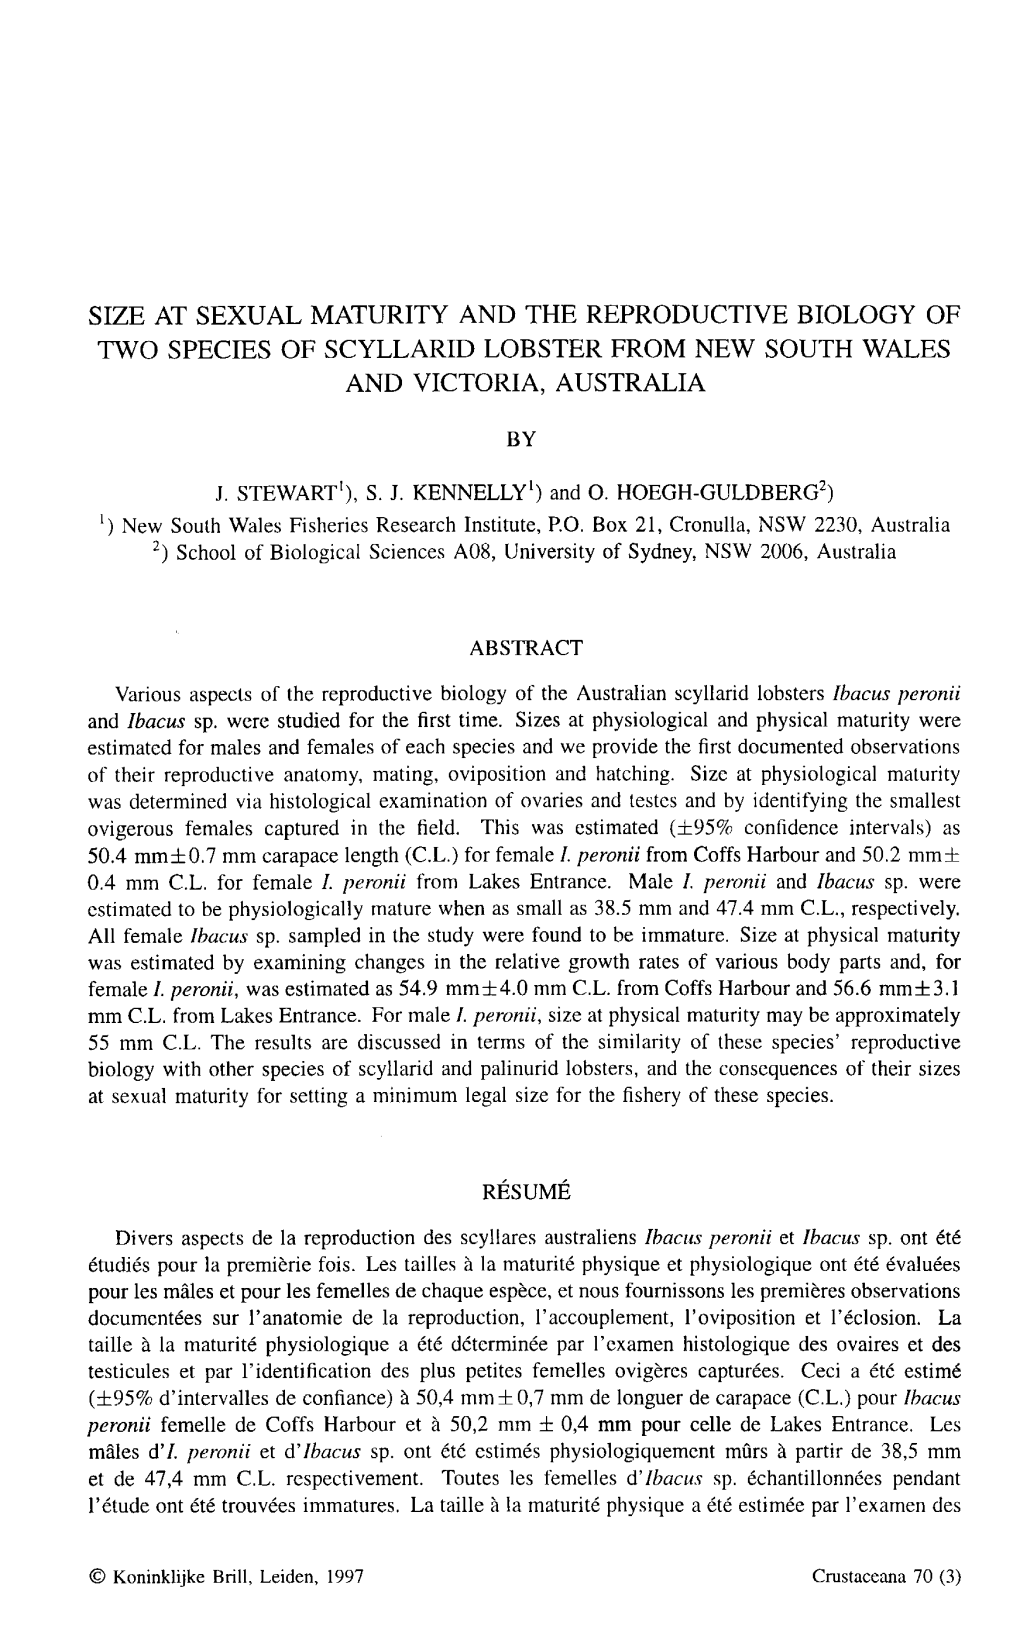 Size at Sexual Maturity and the Reproductive Biology of Two Species of Scyllarid Lobster from New South Wales and Victoria, Australia